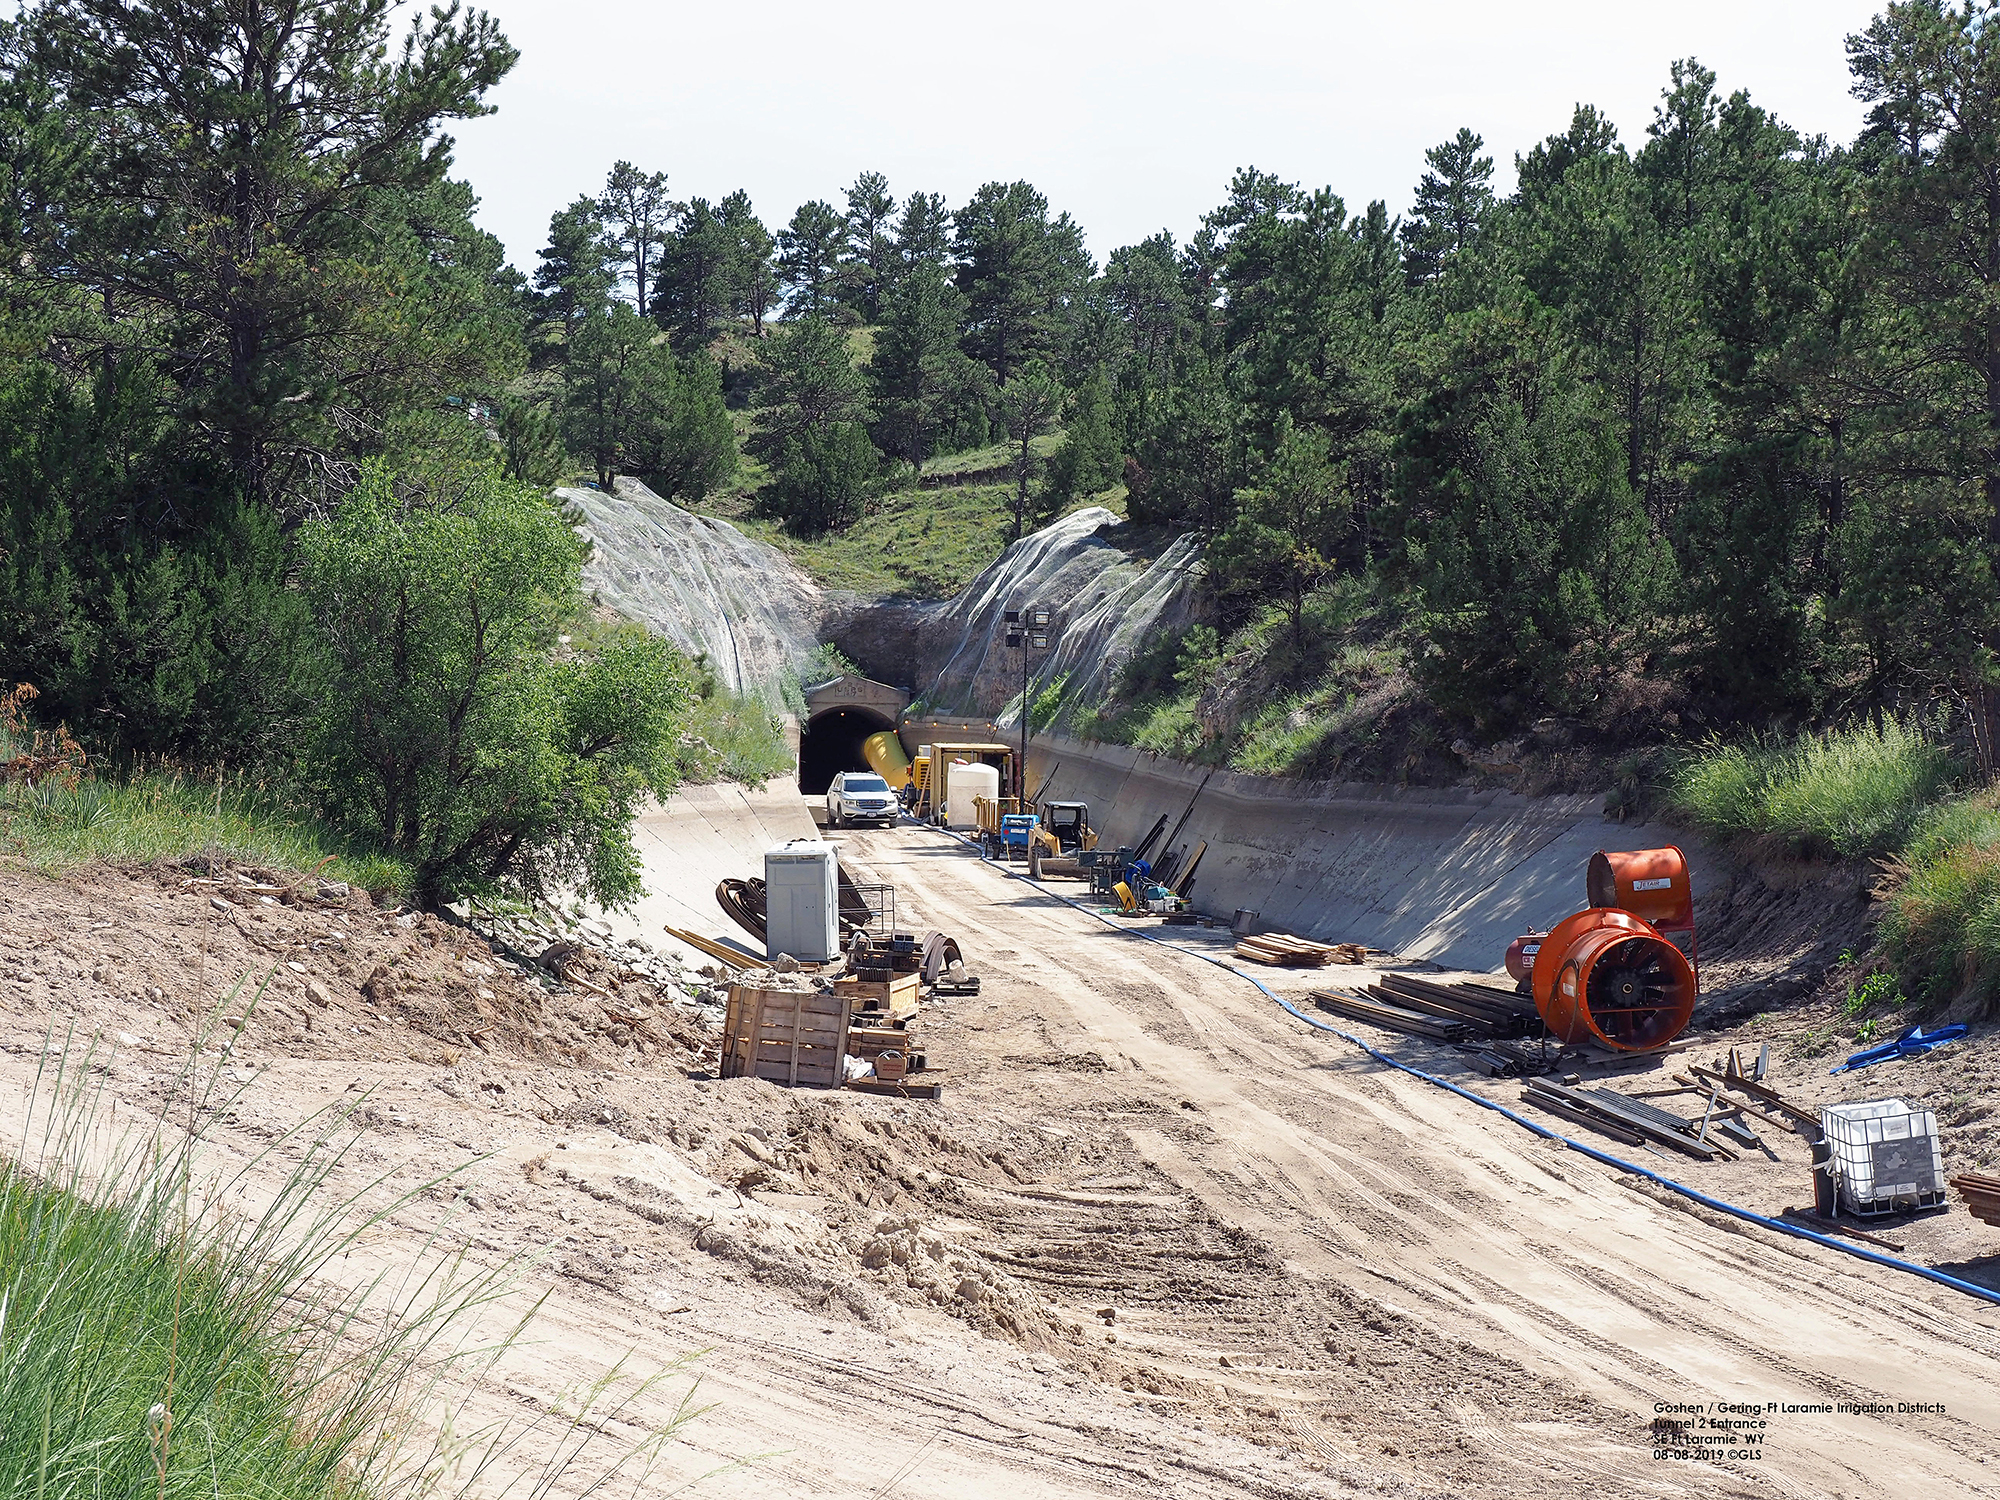 Equipment sits at the mouth of the tunnel that collapsed on July 17 on the Goshen/Gering-Fort Laramie Irrigation canal. This photo was taken on Aug. 8. Efforts to repair the tunnel were on-going as of mid-August.